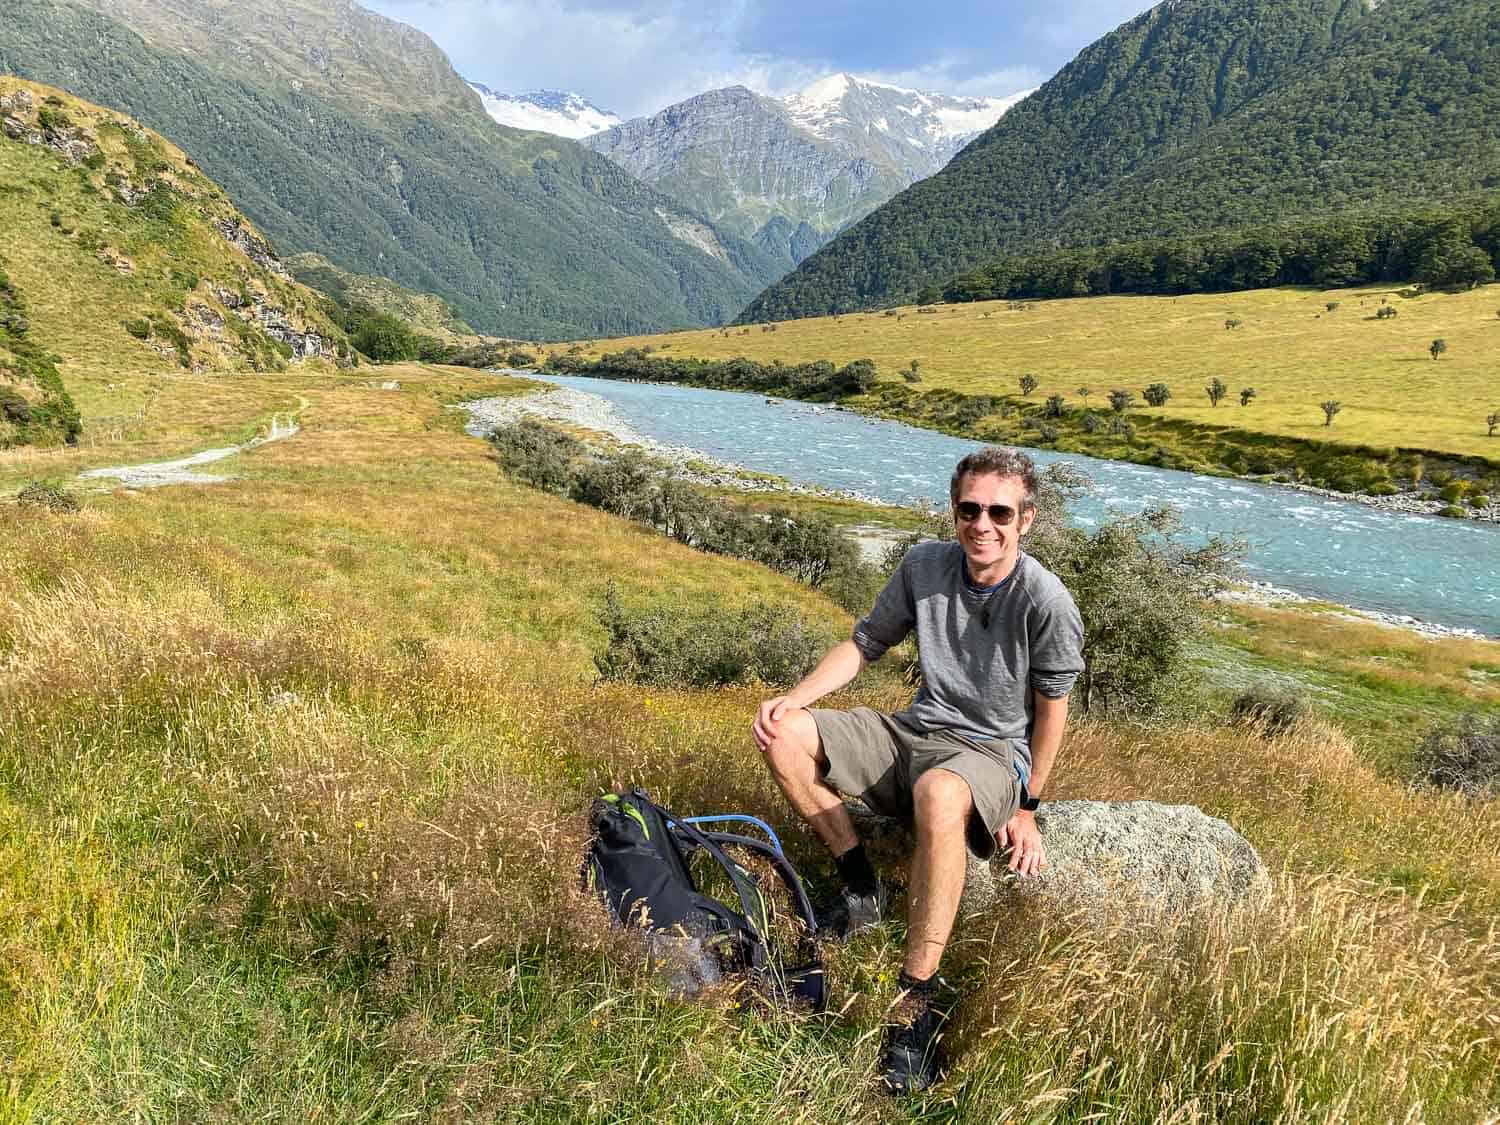 Simon on a hike in Mount Aspiring National Park